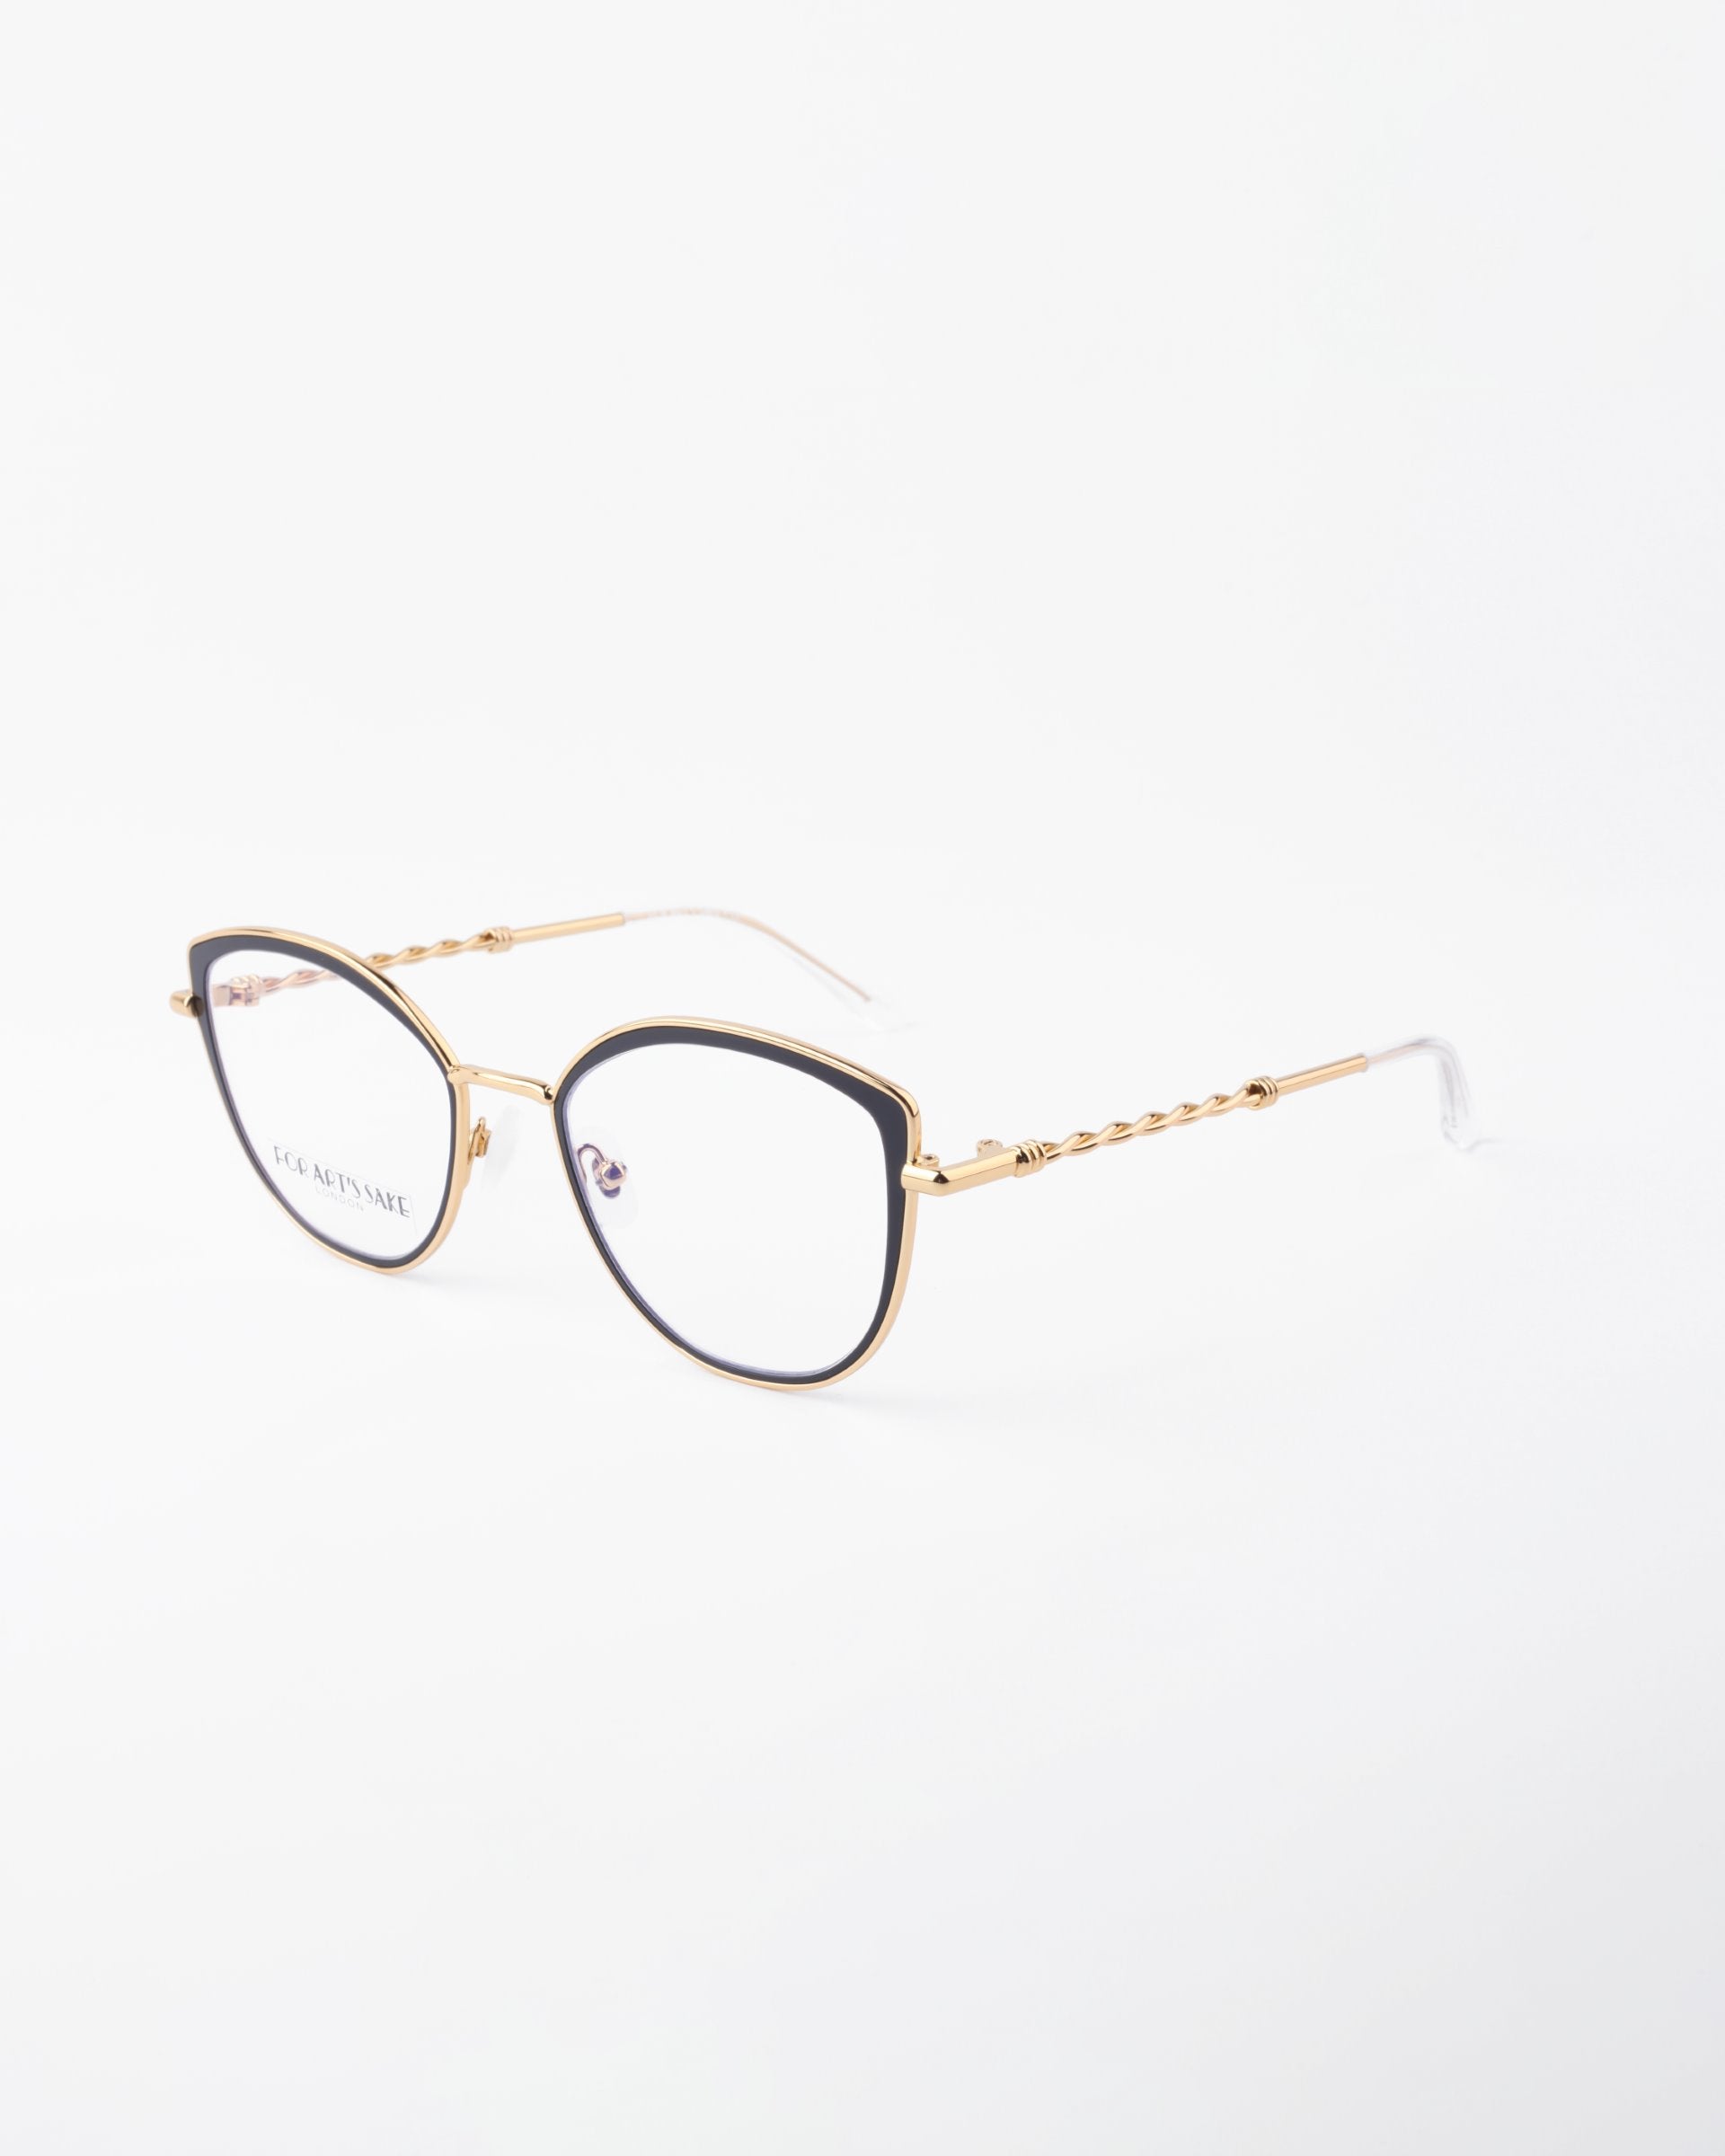 A pair of stylish eyeglasses with thin 18-karat gold-plated frames, black detailing around the lenses, and a twisted design on the earpieces. Featuring a Blue Light Filter, these For Art's Sake® Julie glasses are displayed on a white background and angled slightly to the left.